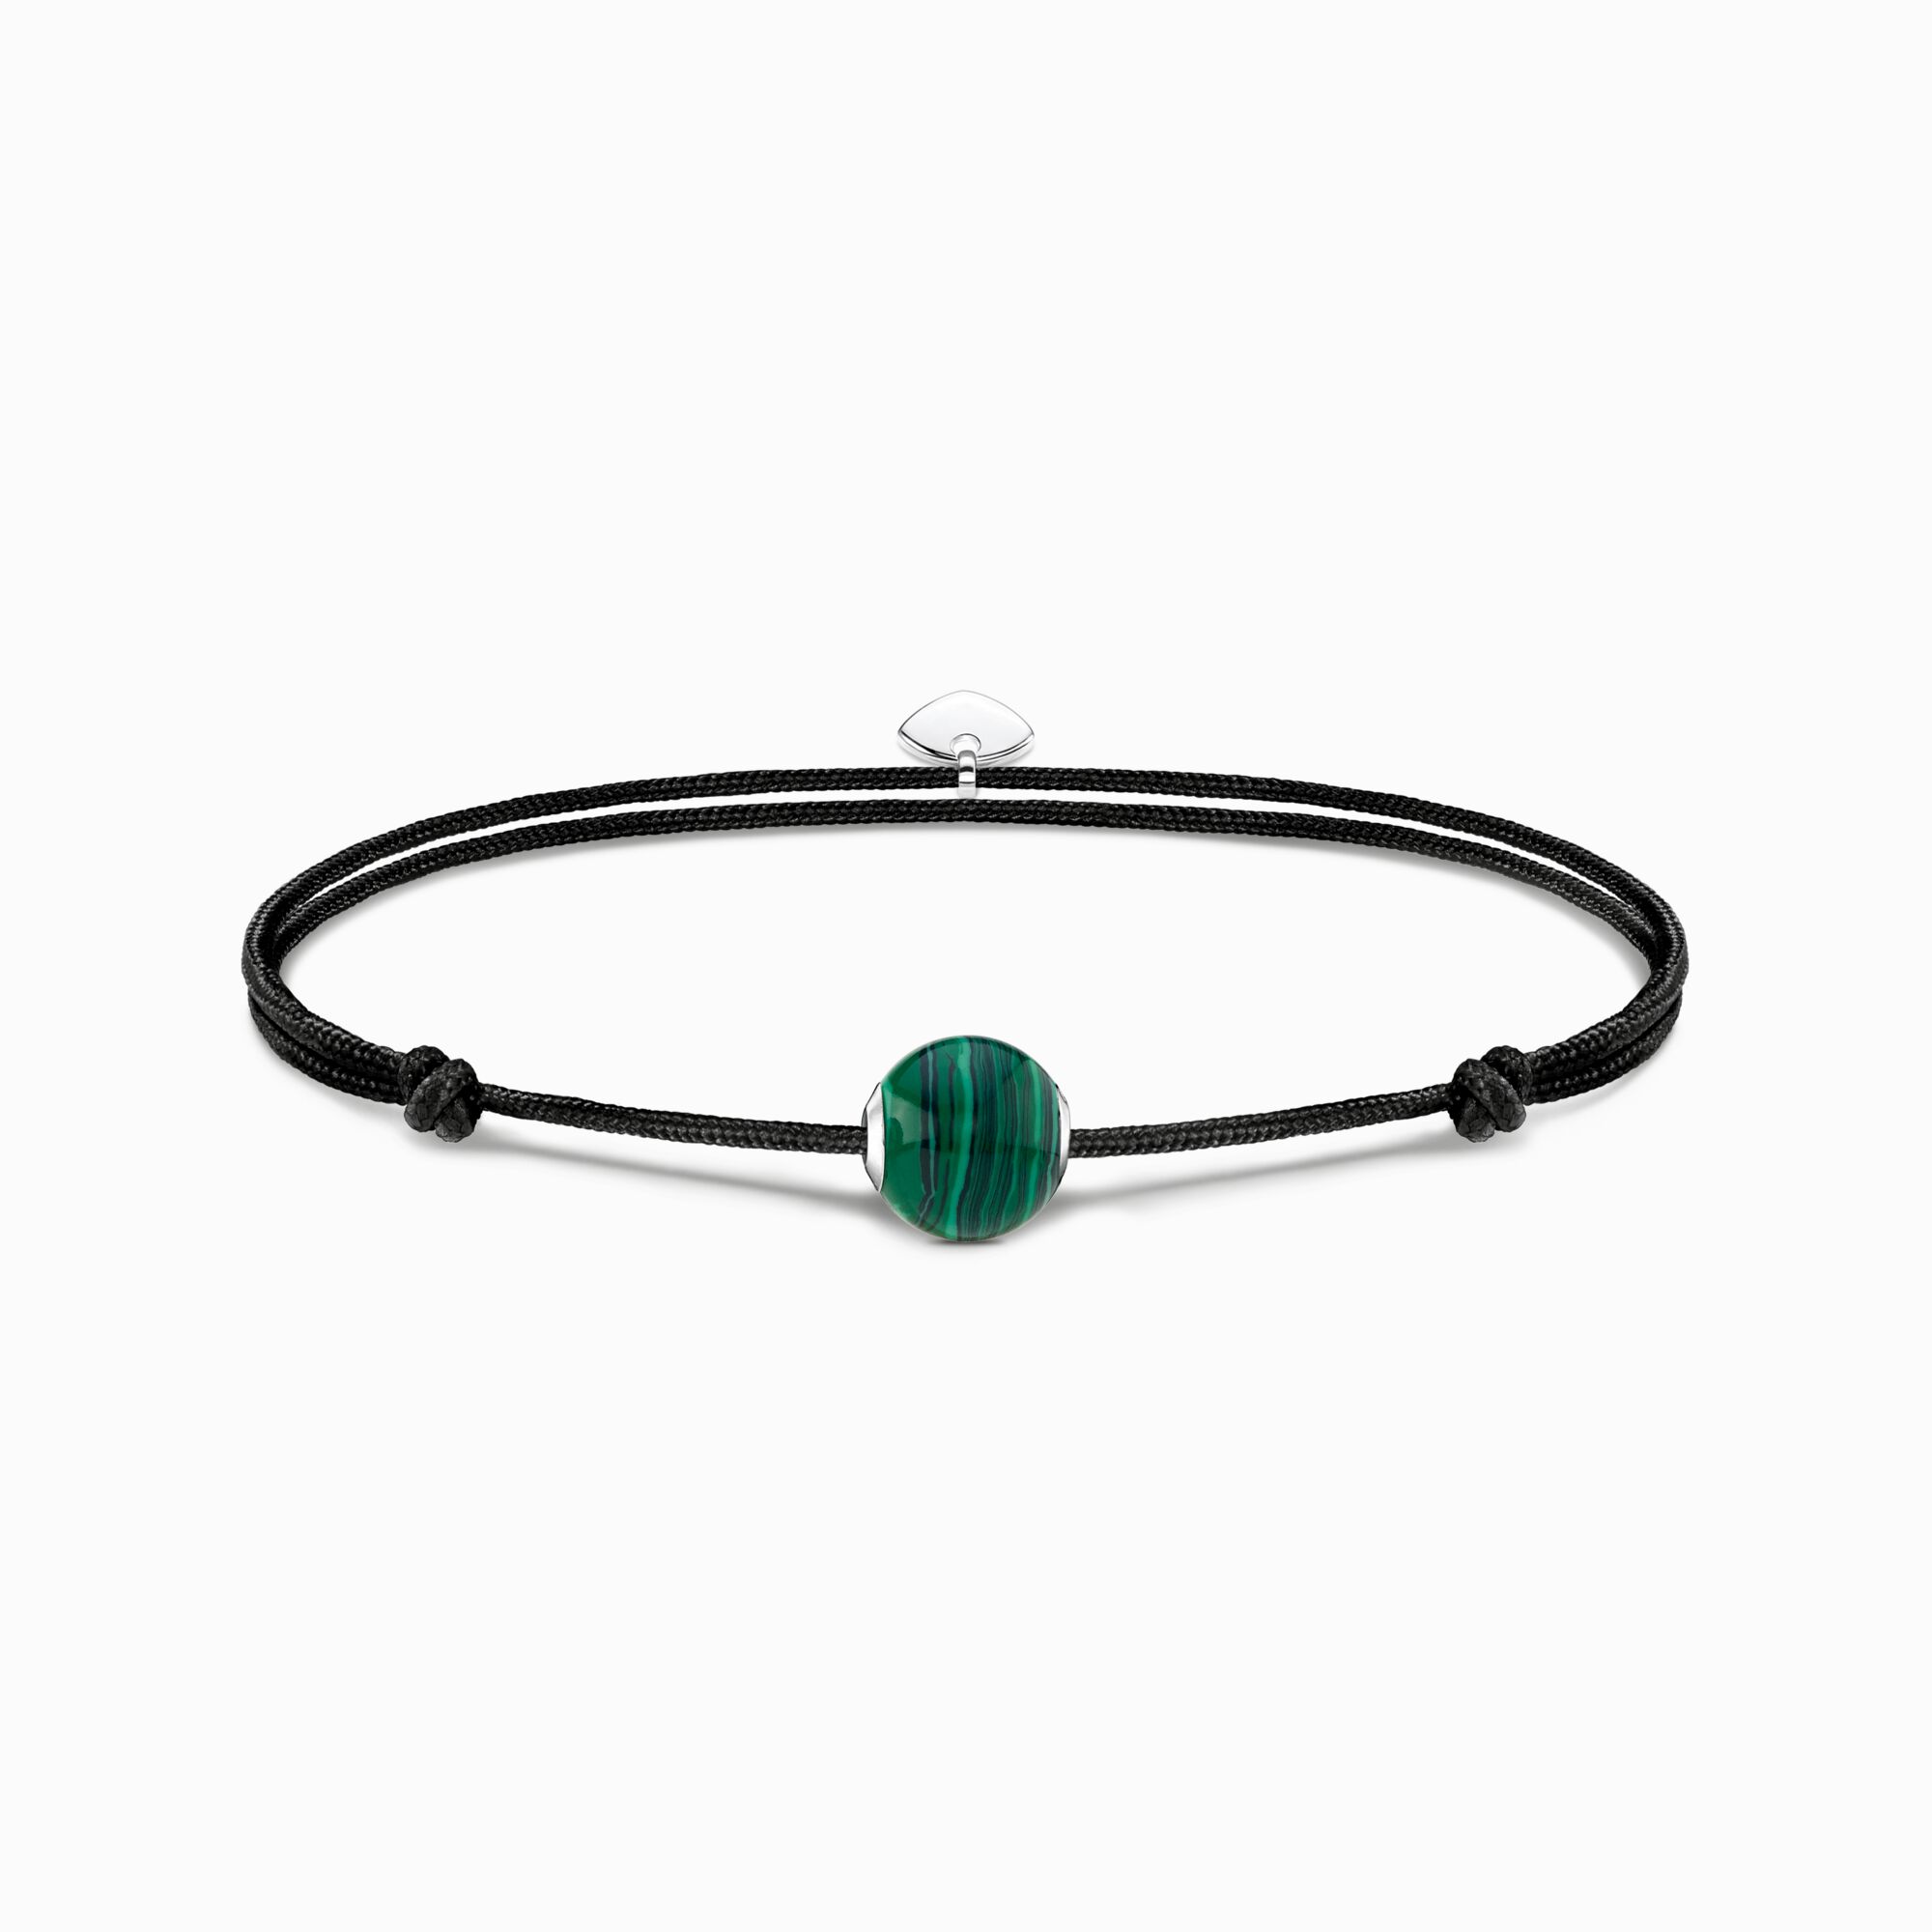 Bracelet Karma Secret with green malachite Bead from the Karma Beads collection in the THOMAS SABO online store